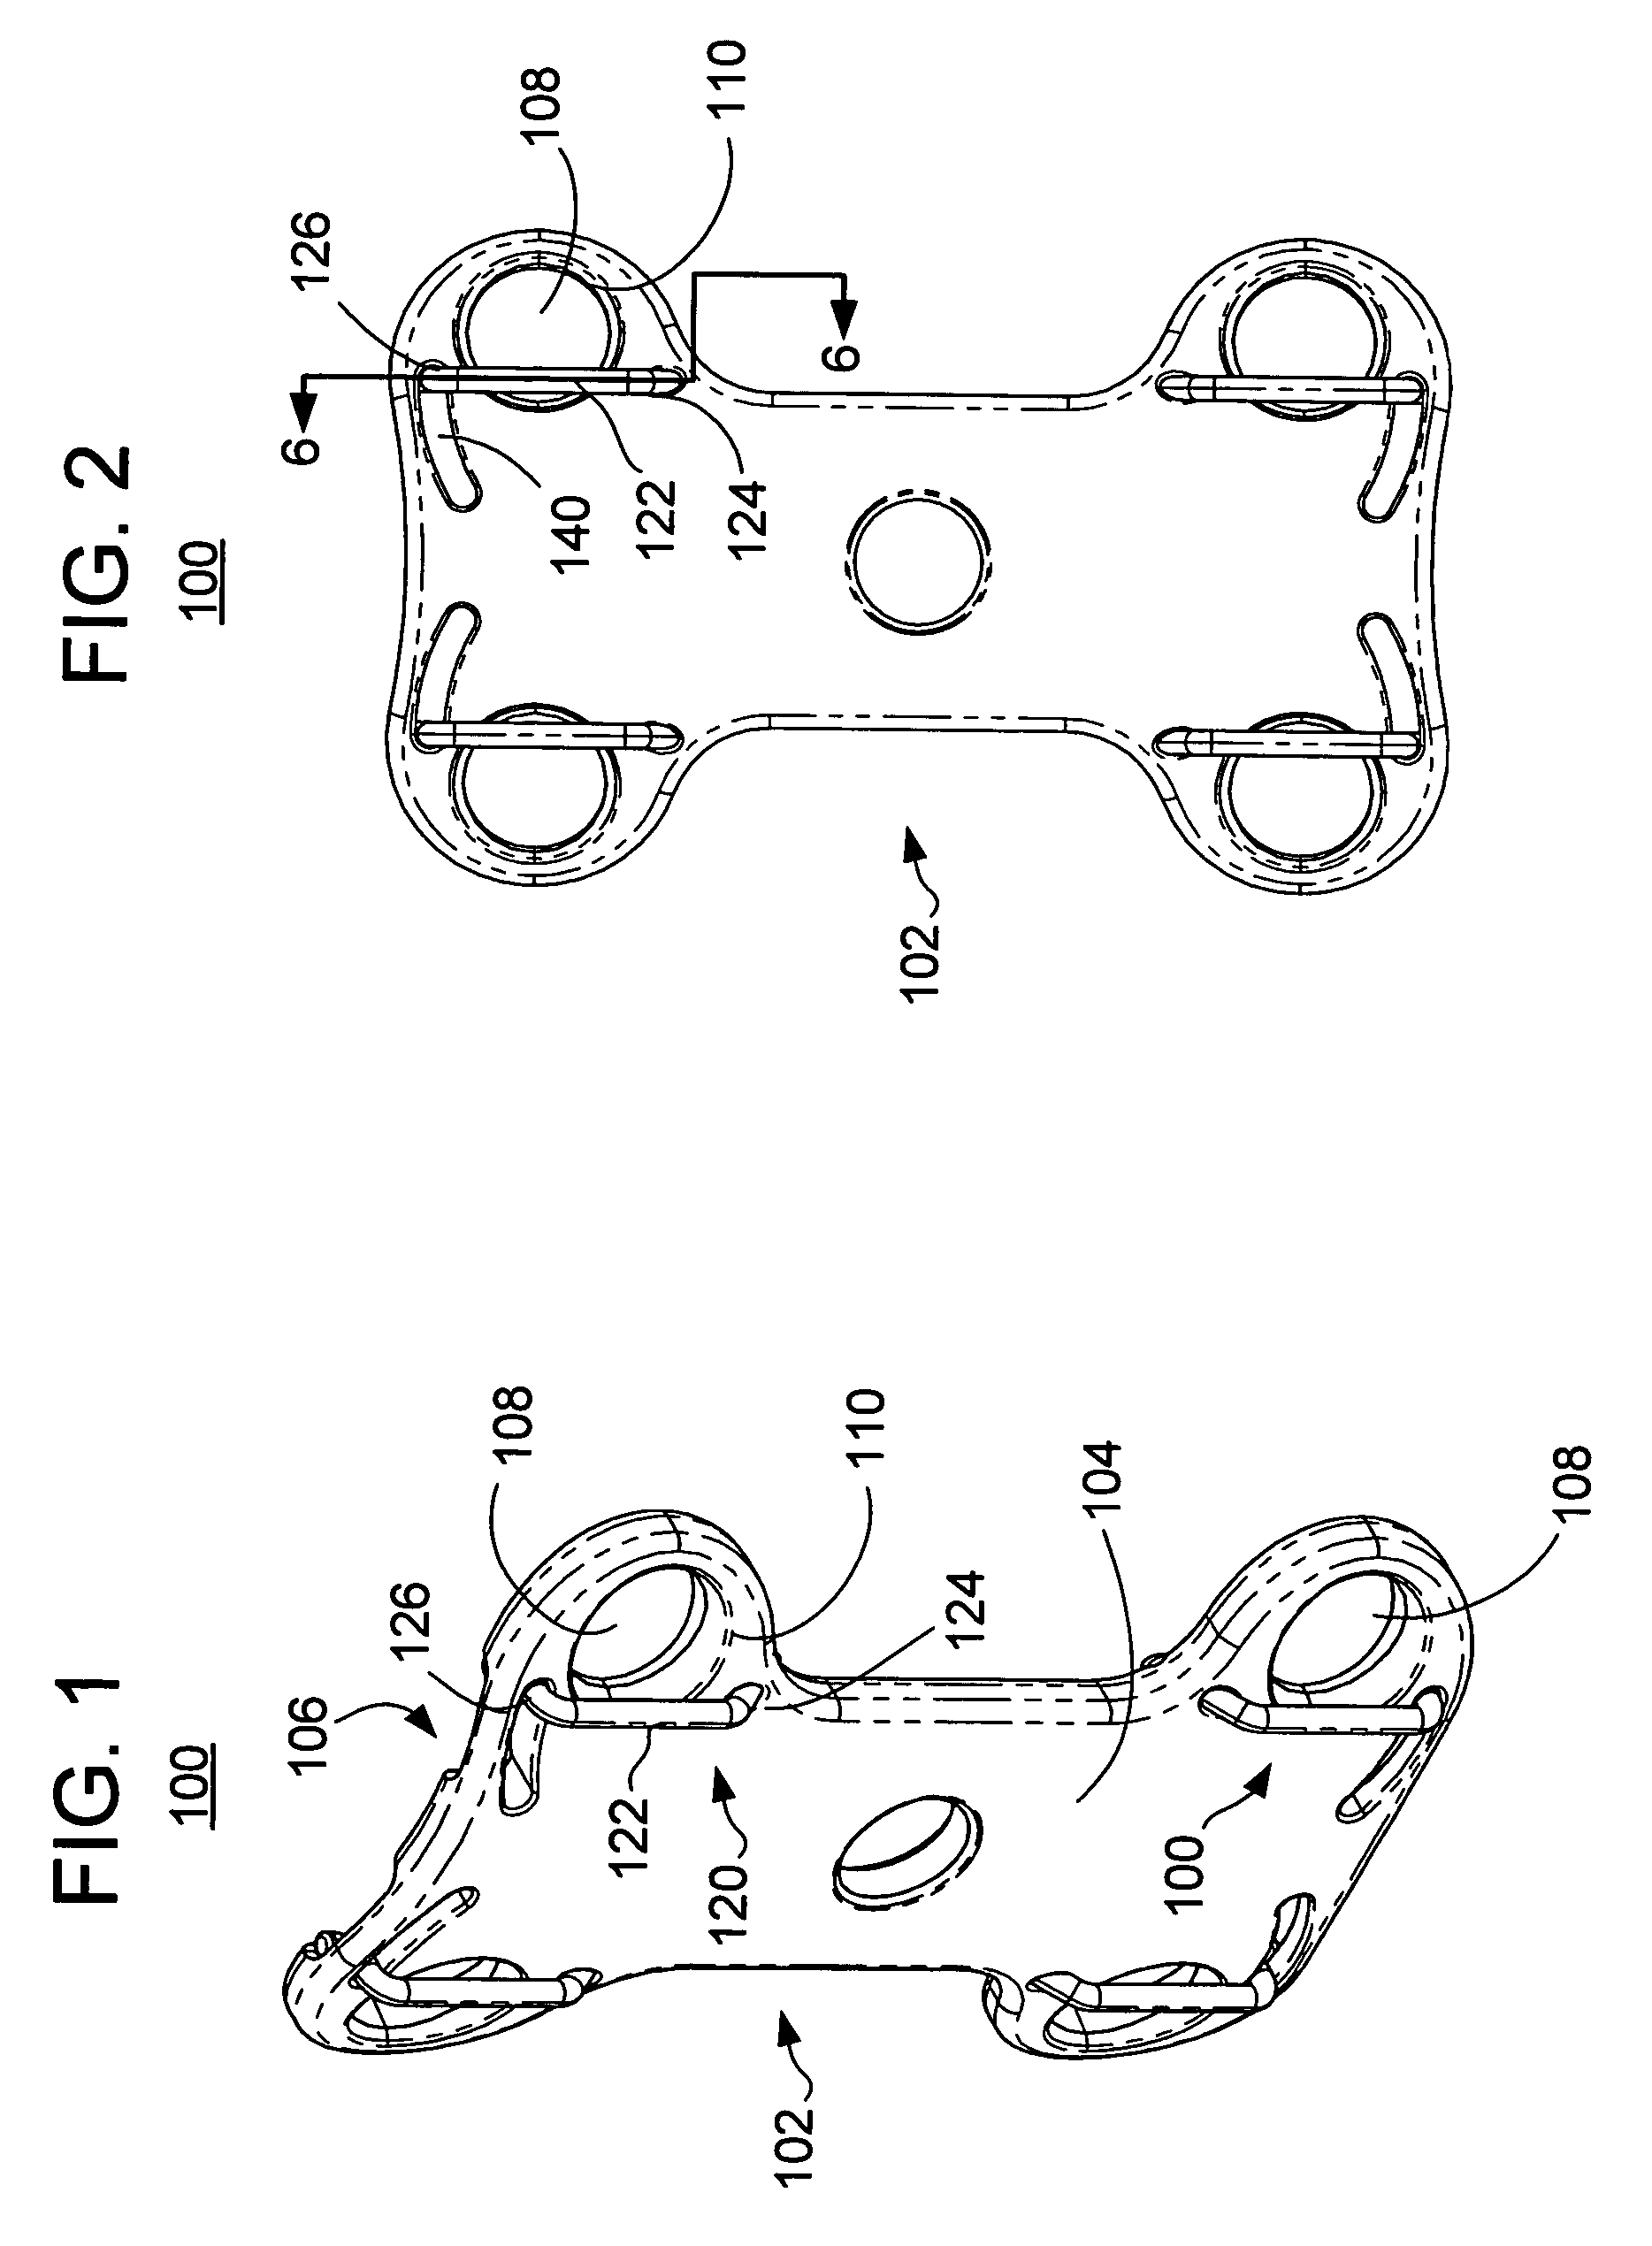 Method and apparatus for providing a retainer for a bone stabilization device